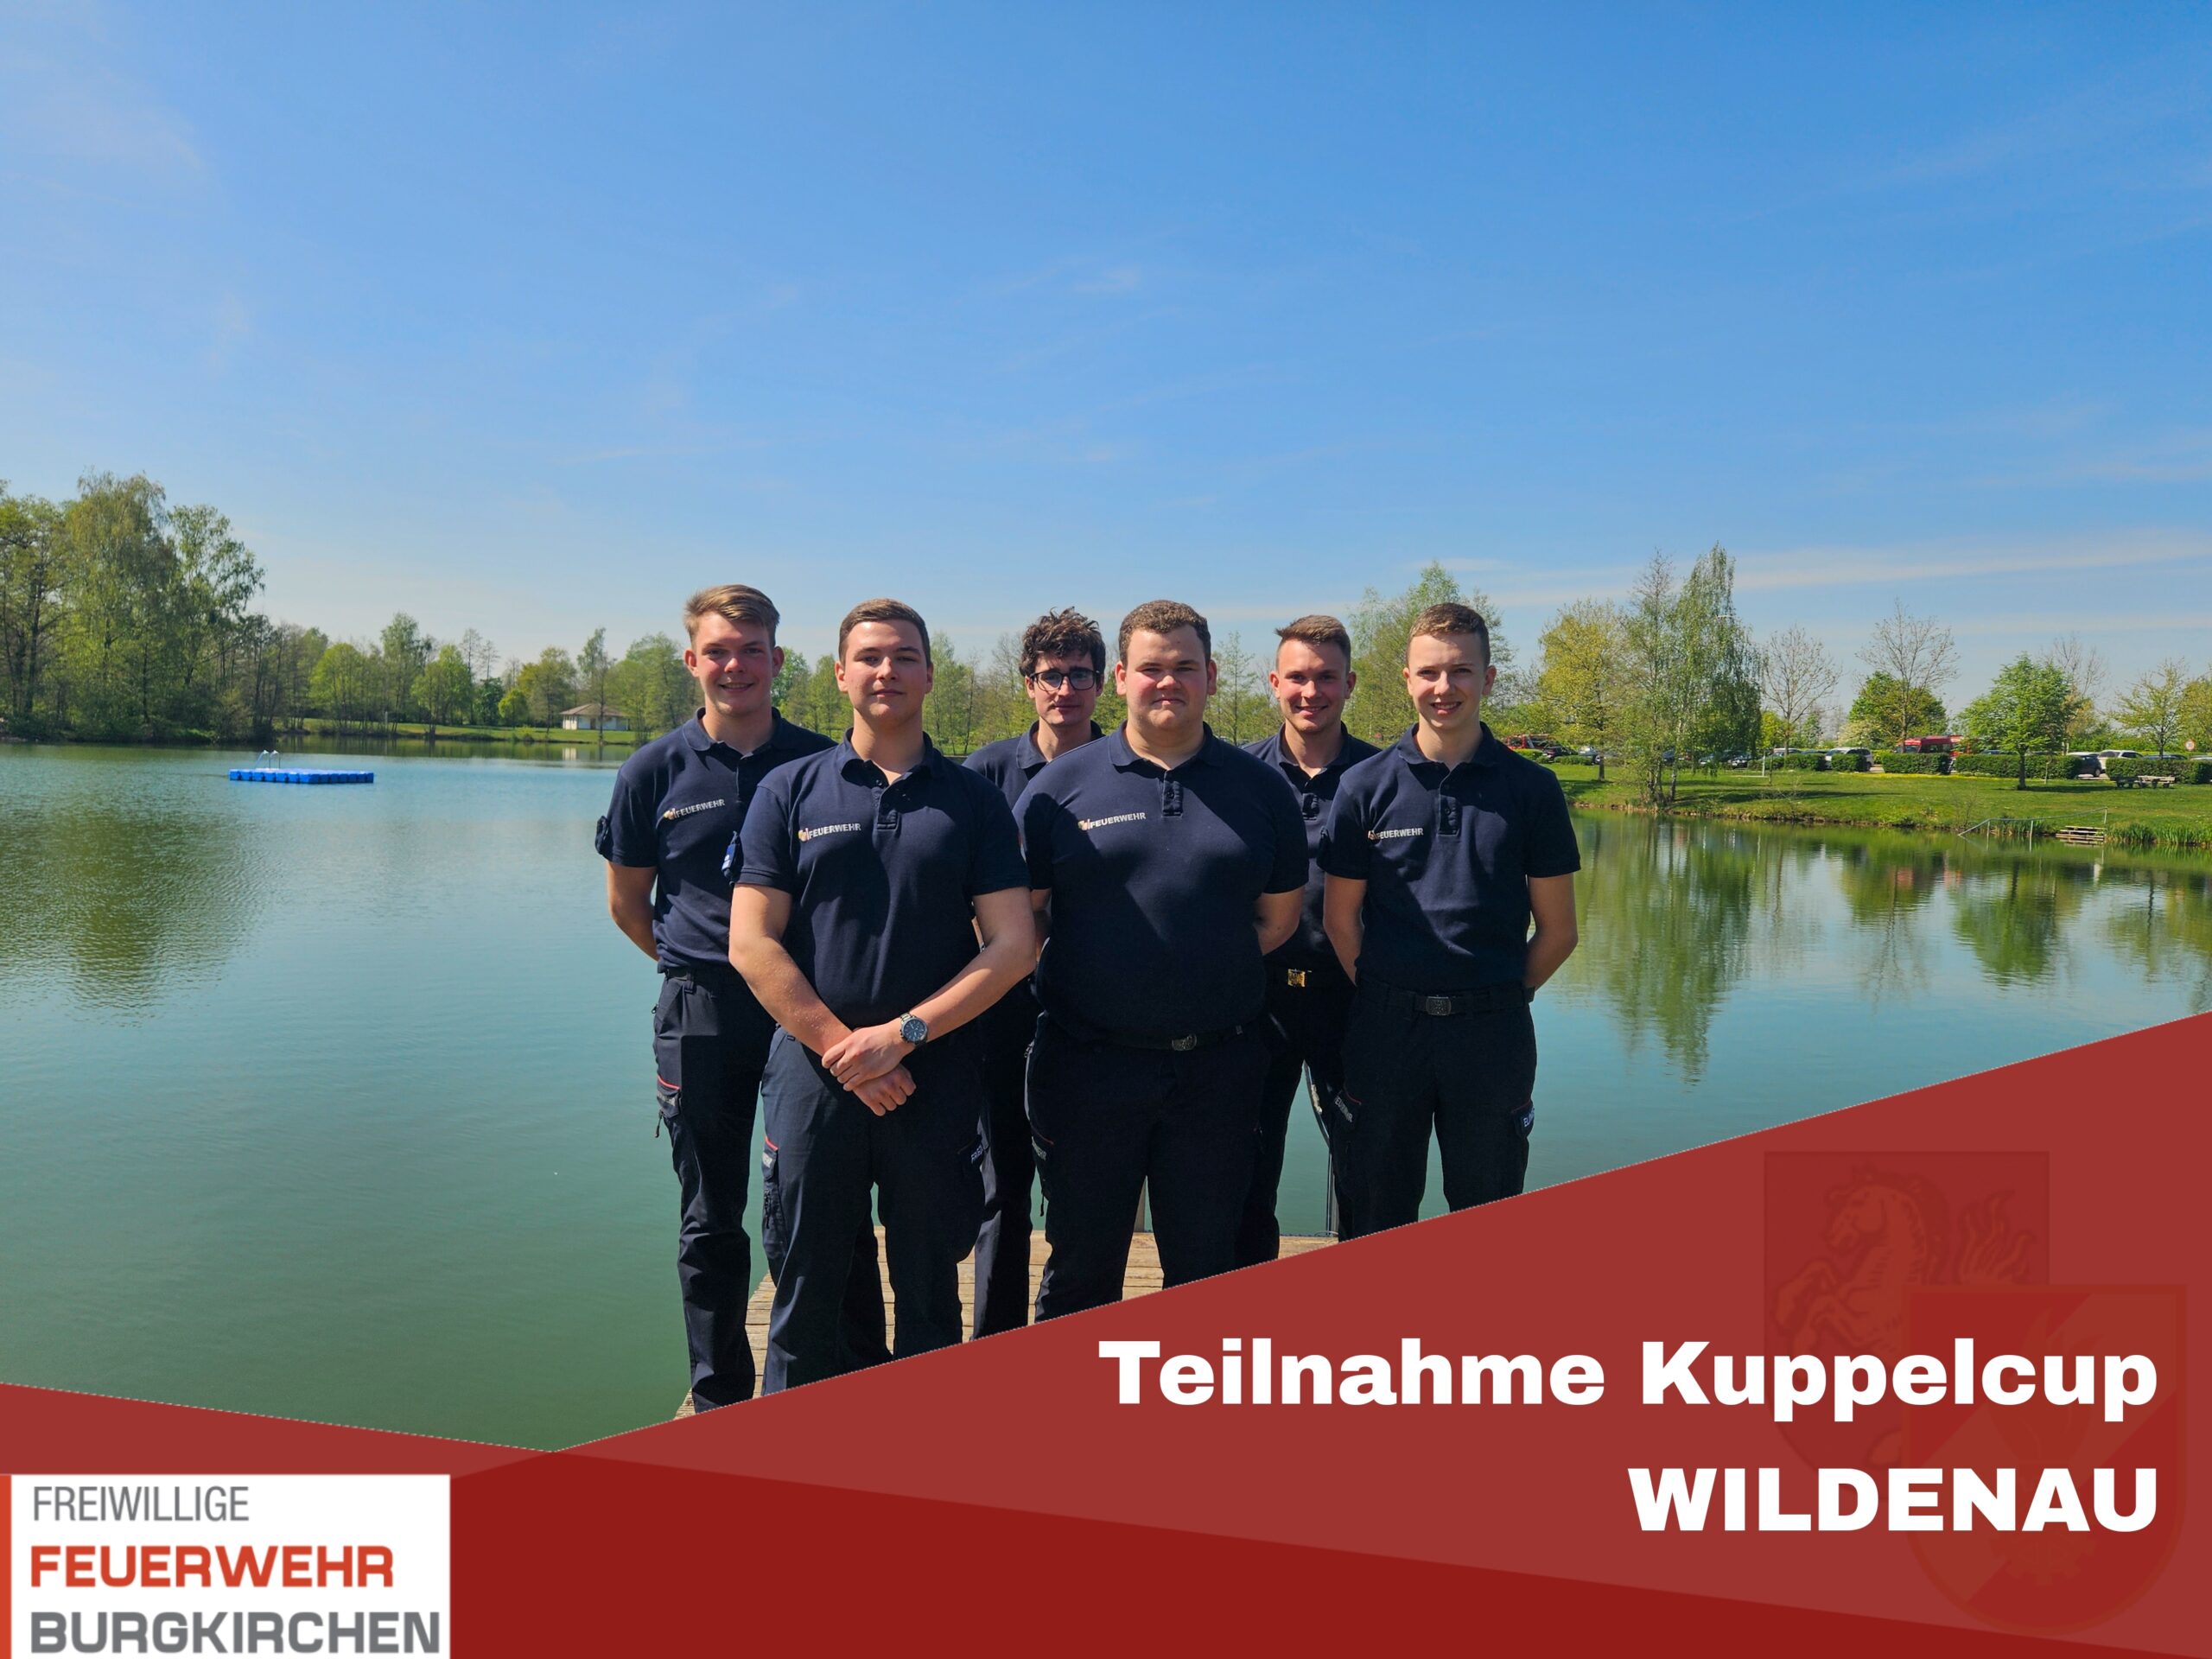 You are currently viewing Teilnahme Kuppelcup Wildenau